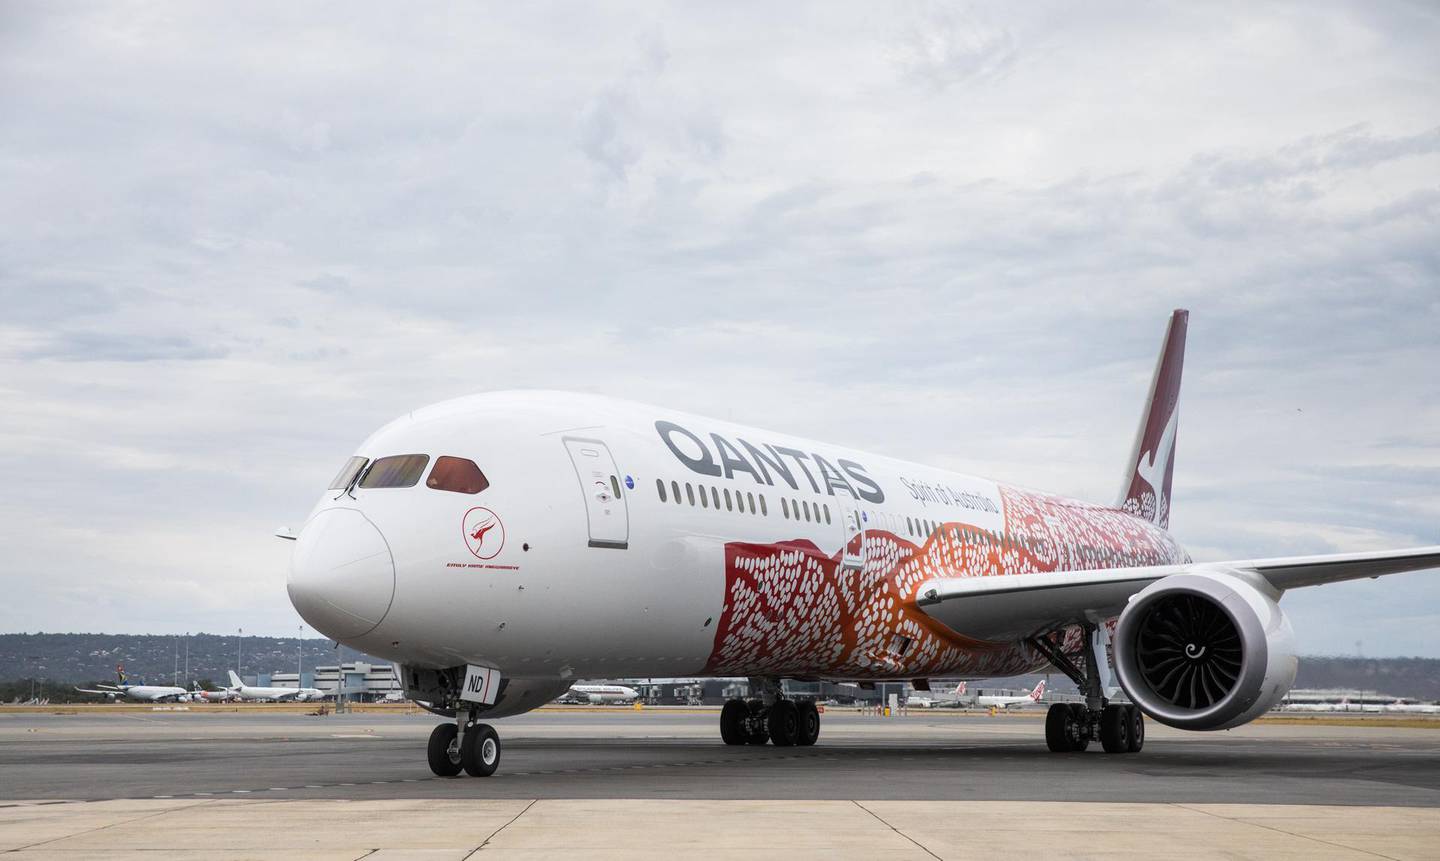 A Qantas Dreamliner ahead of take-off on the first direct Perth to London flight in March 2018. Project Sunrise flights from Australia to London and New York will surpass this route as the longest in Qantas's network. Courtesy Qantas